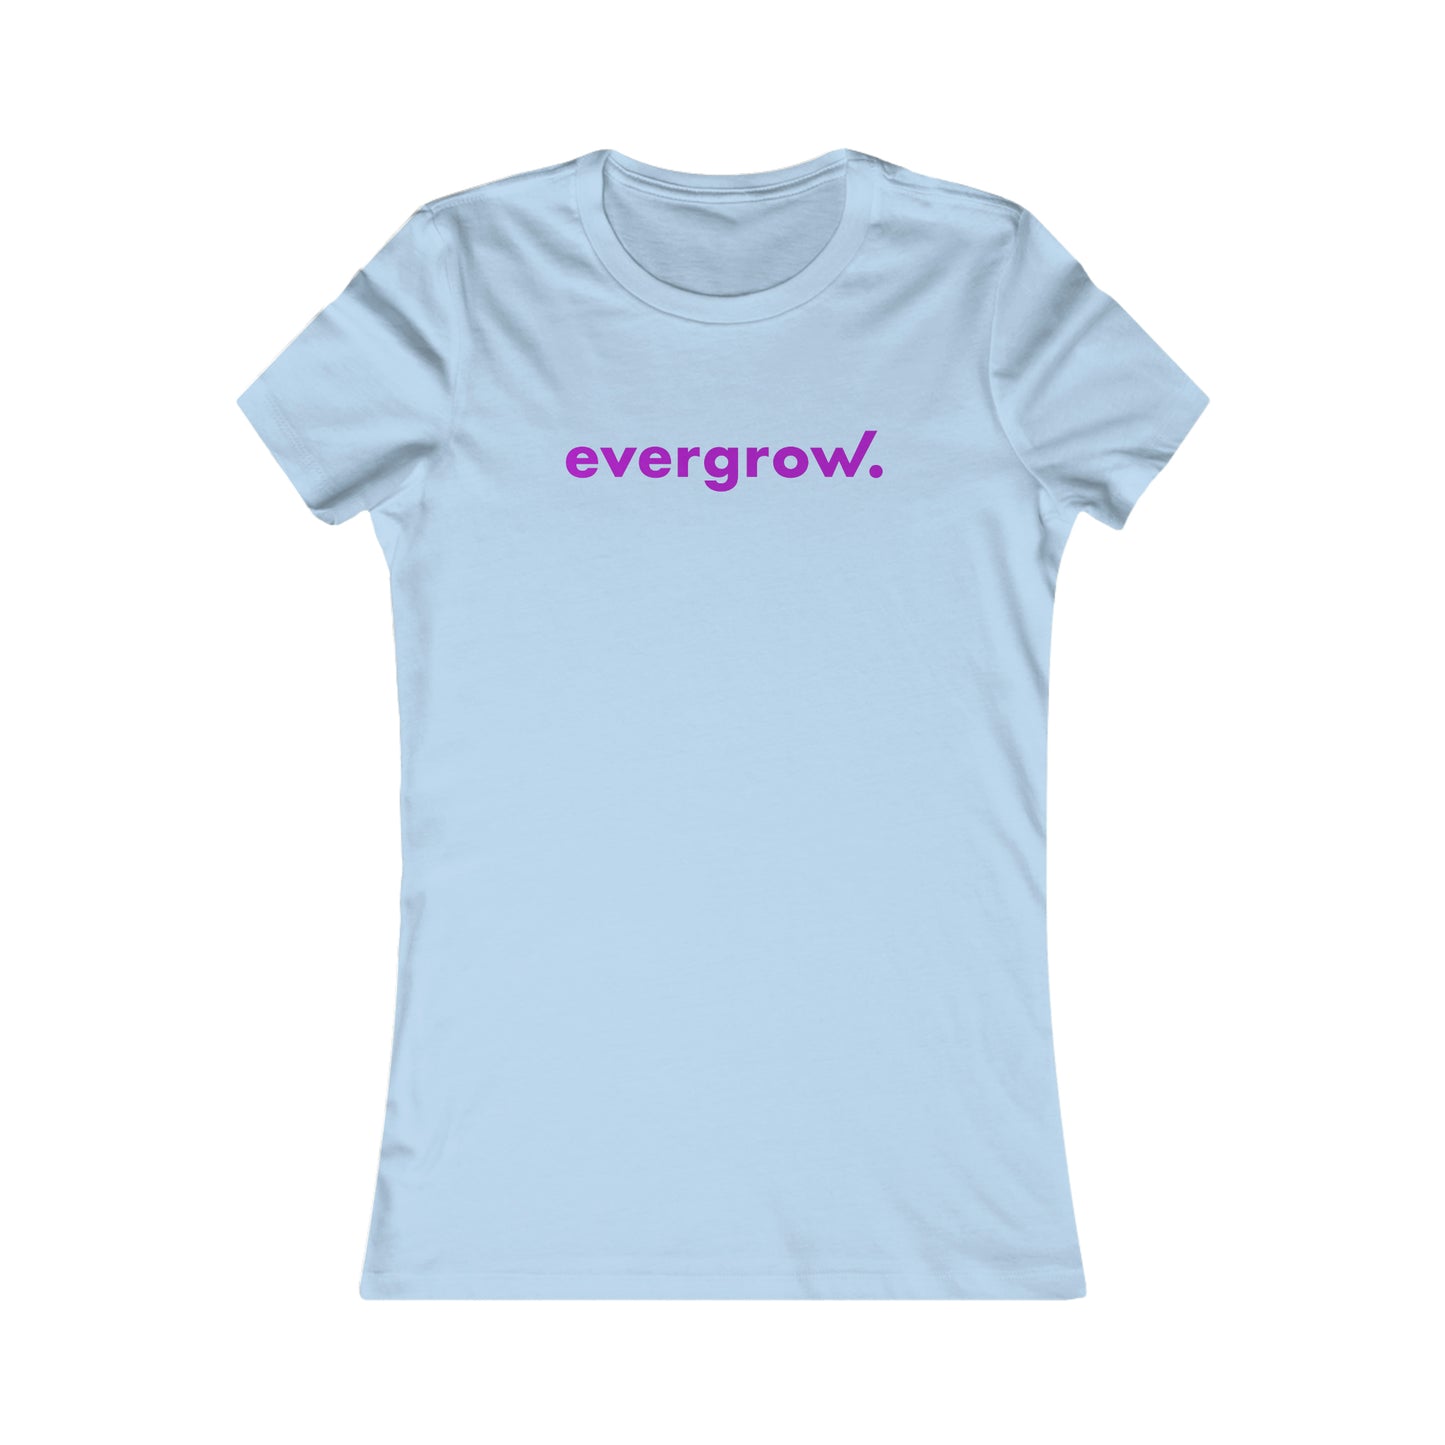 USA - Women's Favorite Tee with evergrow in purple on front - UTSW